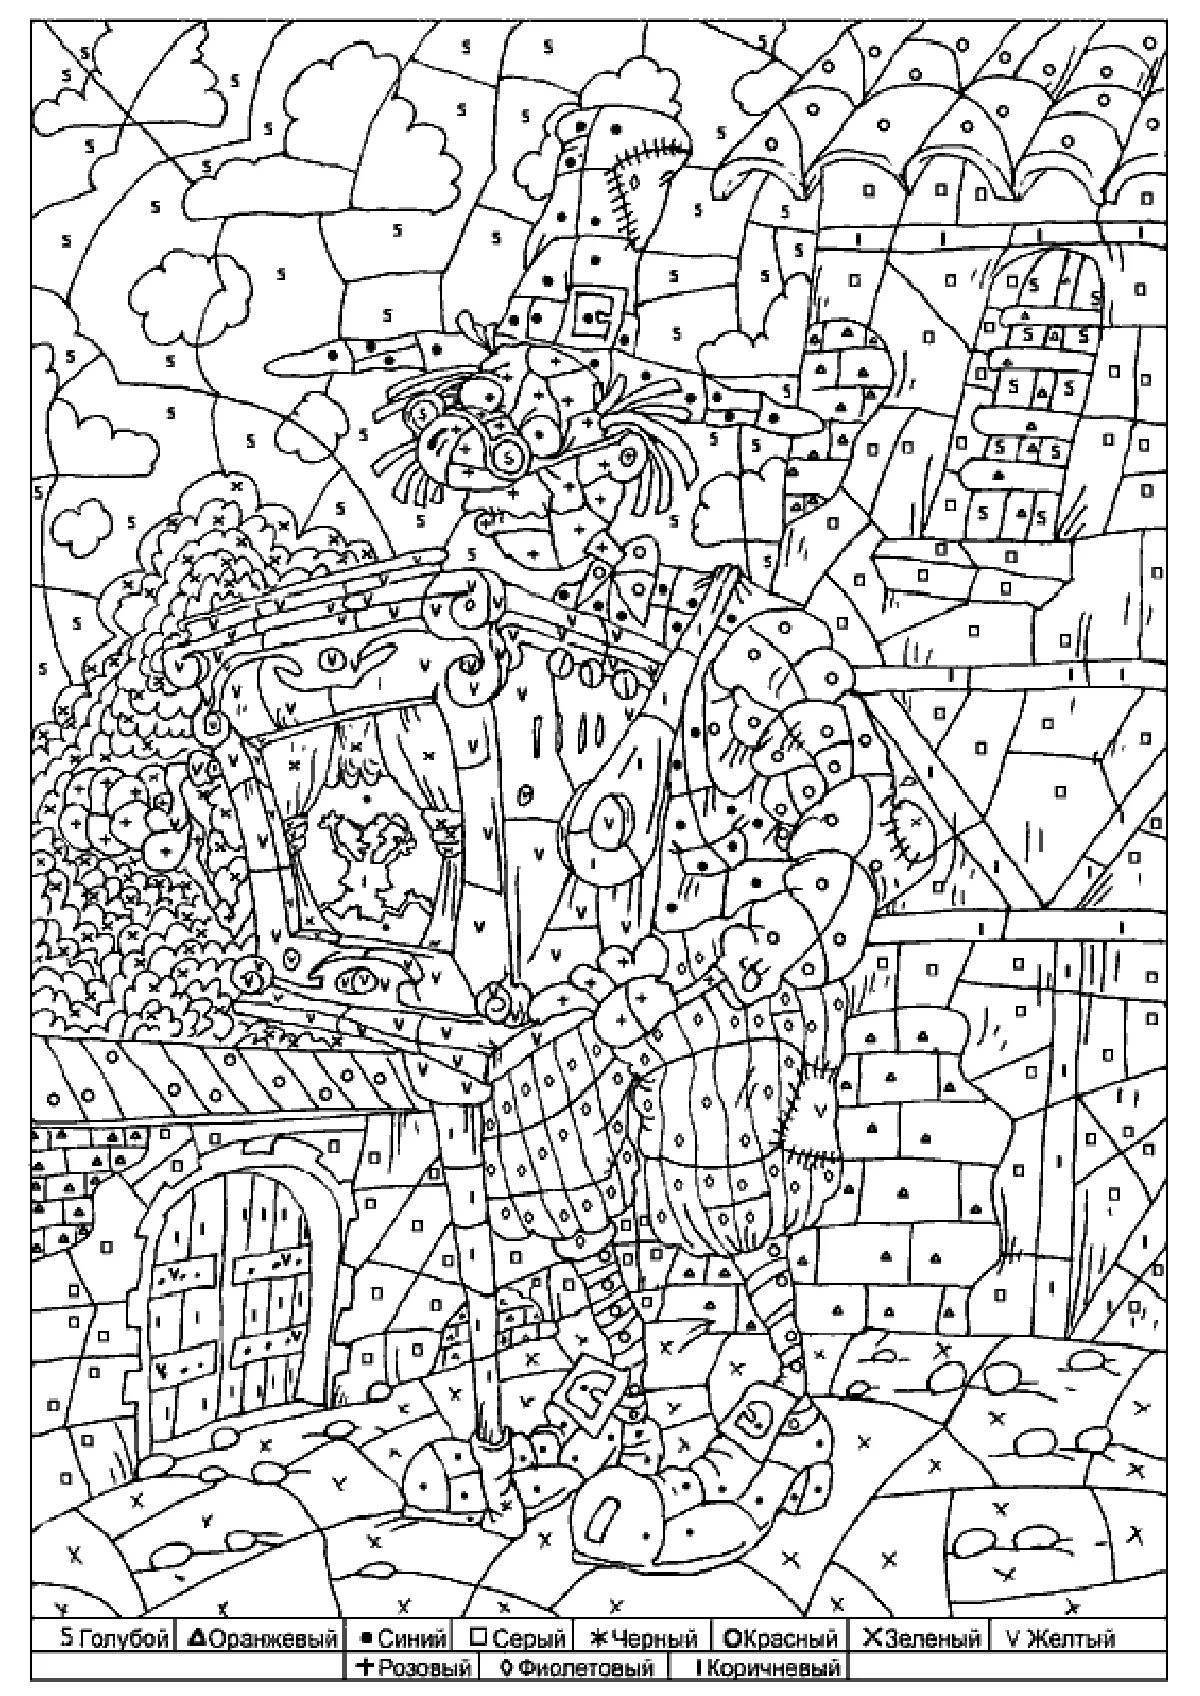 Coloring city by numbers